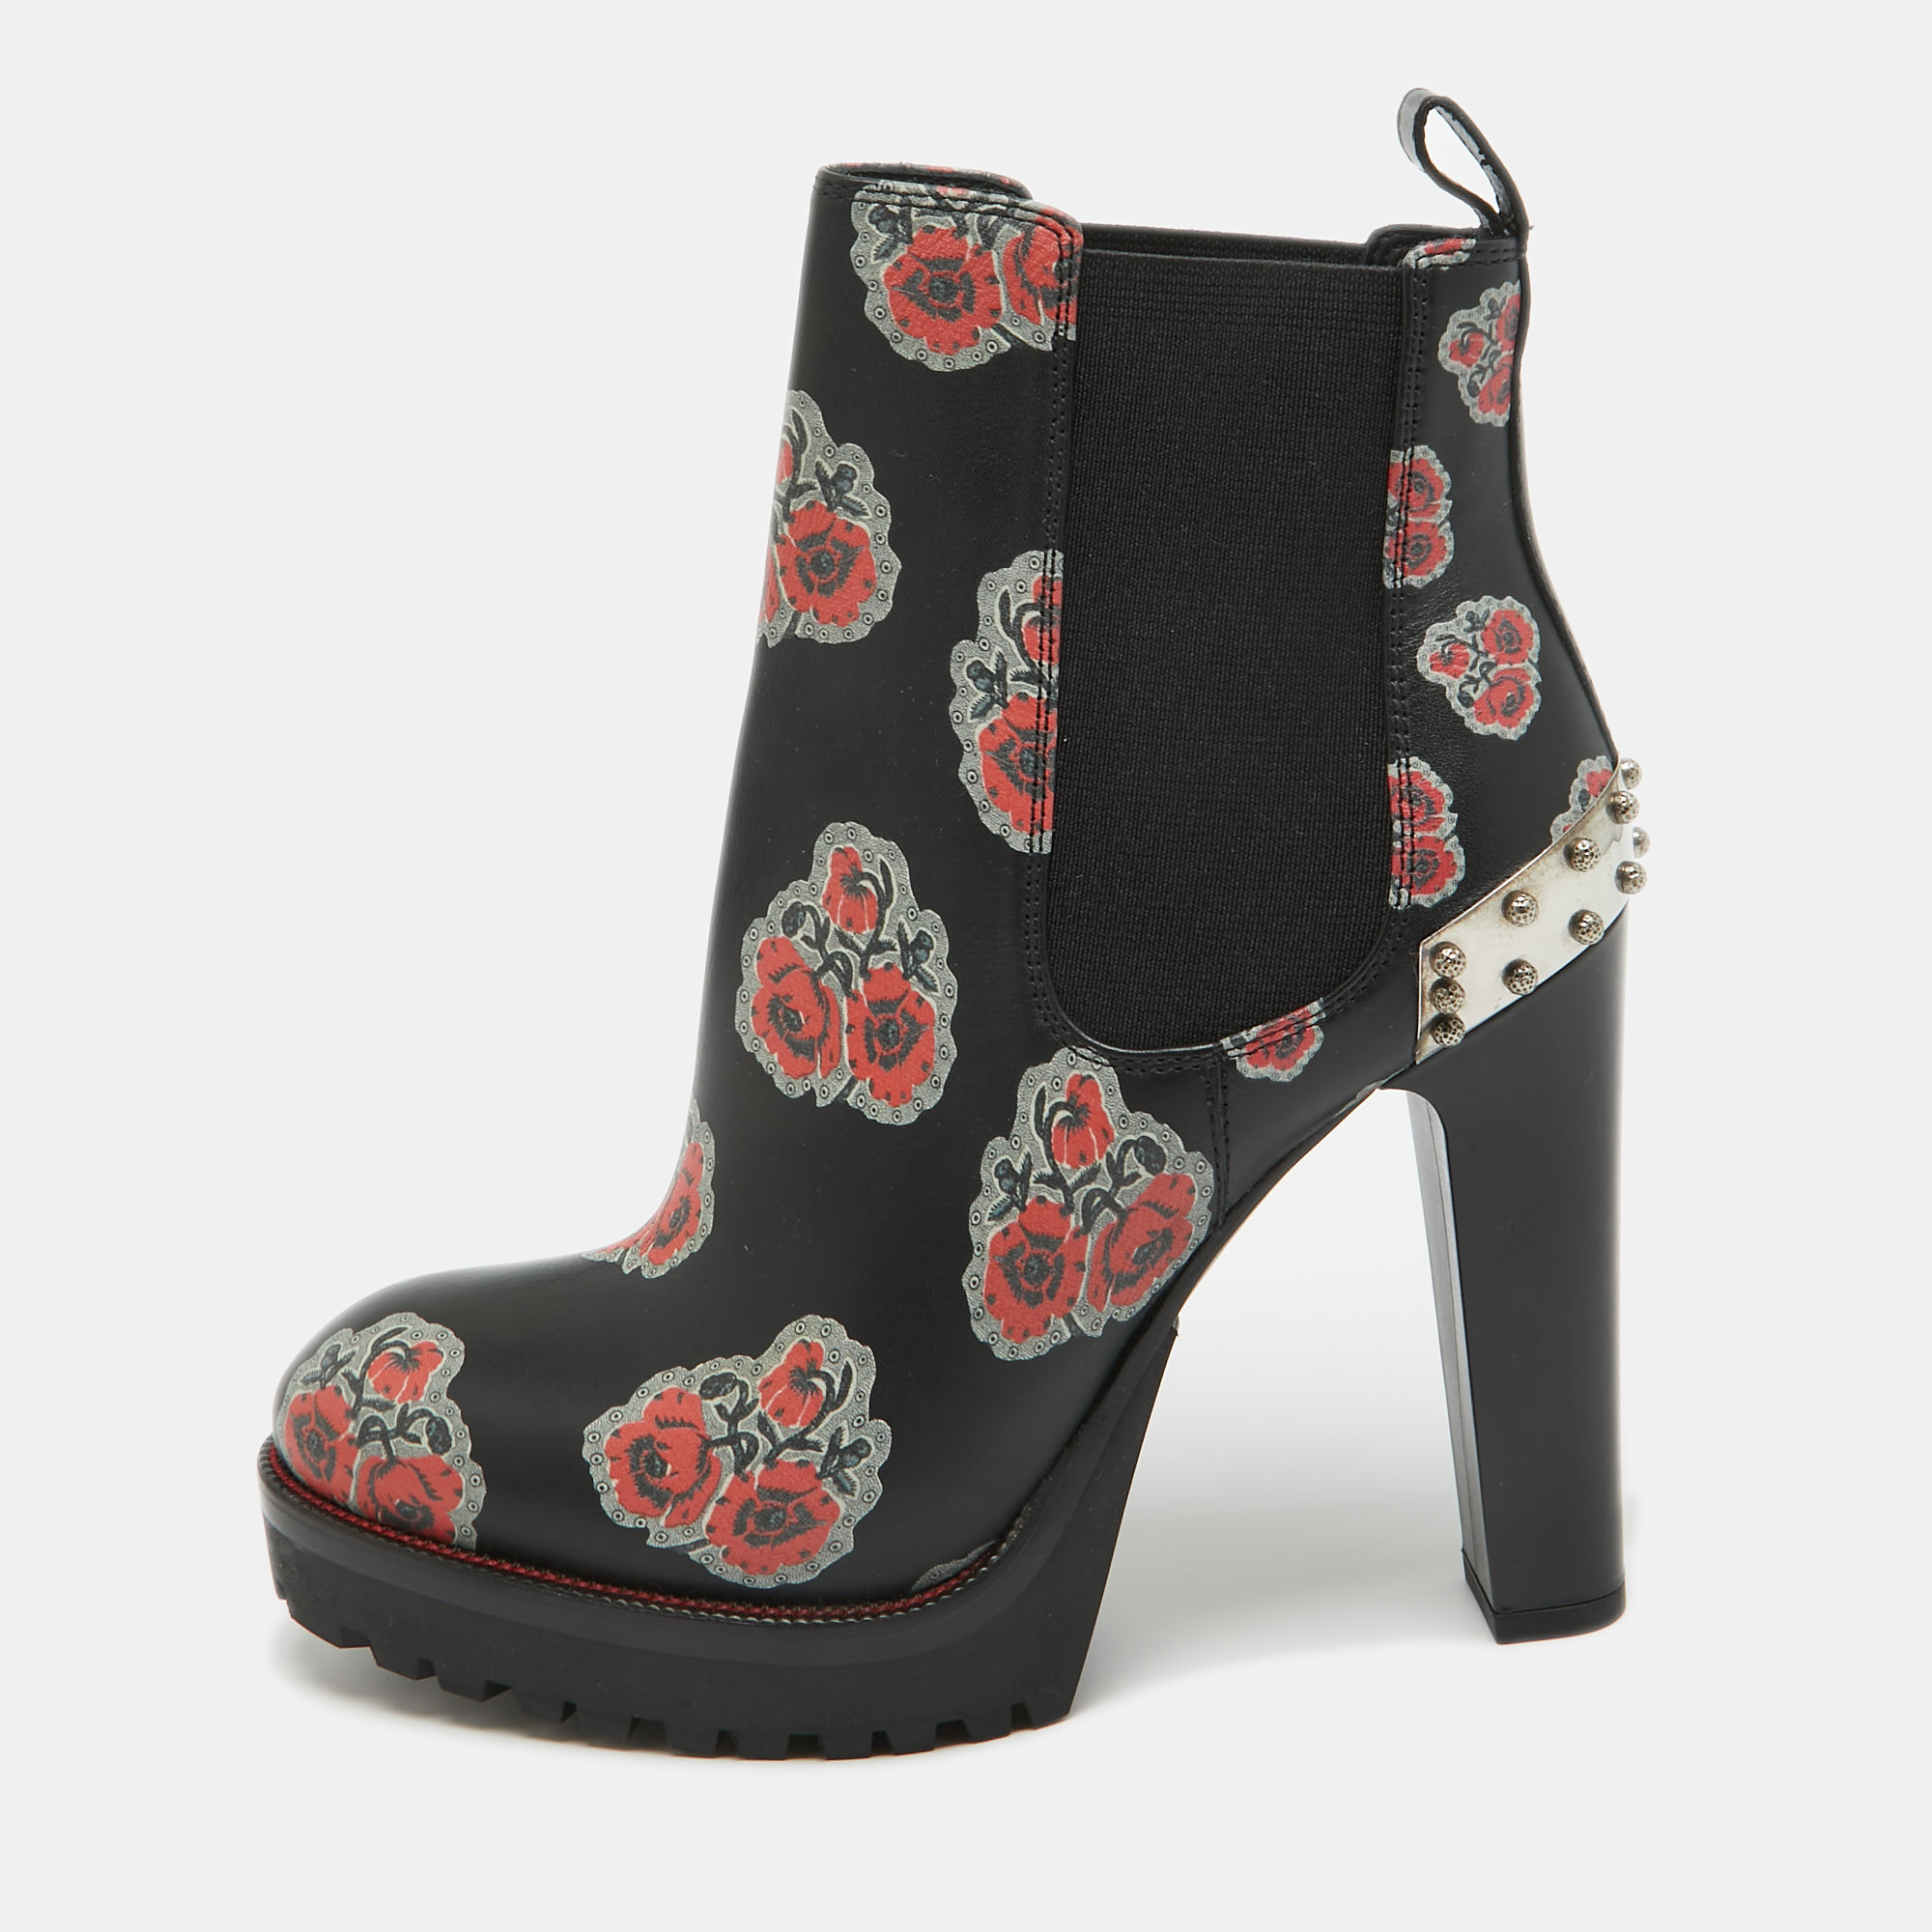 Alexander mcqueen black/red floral print leather studded ankle boots size 36